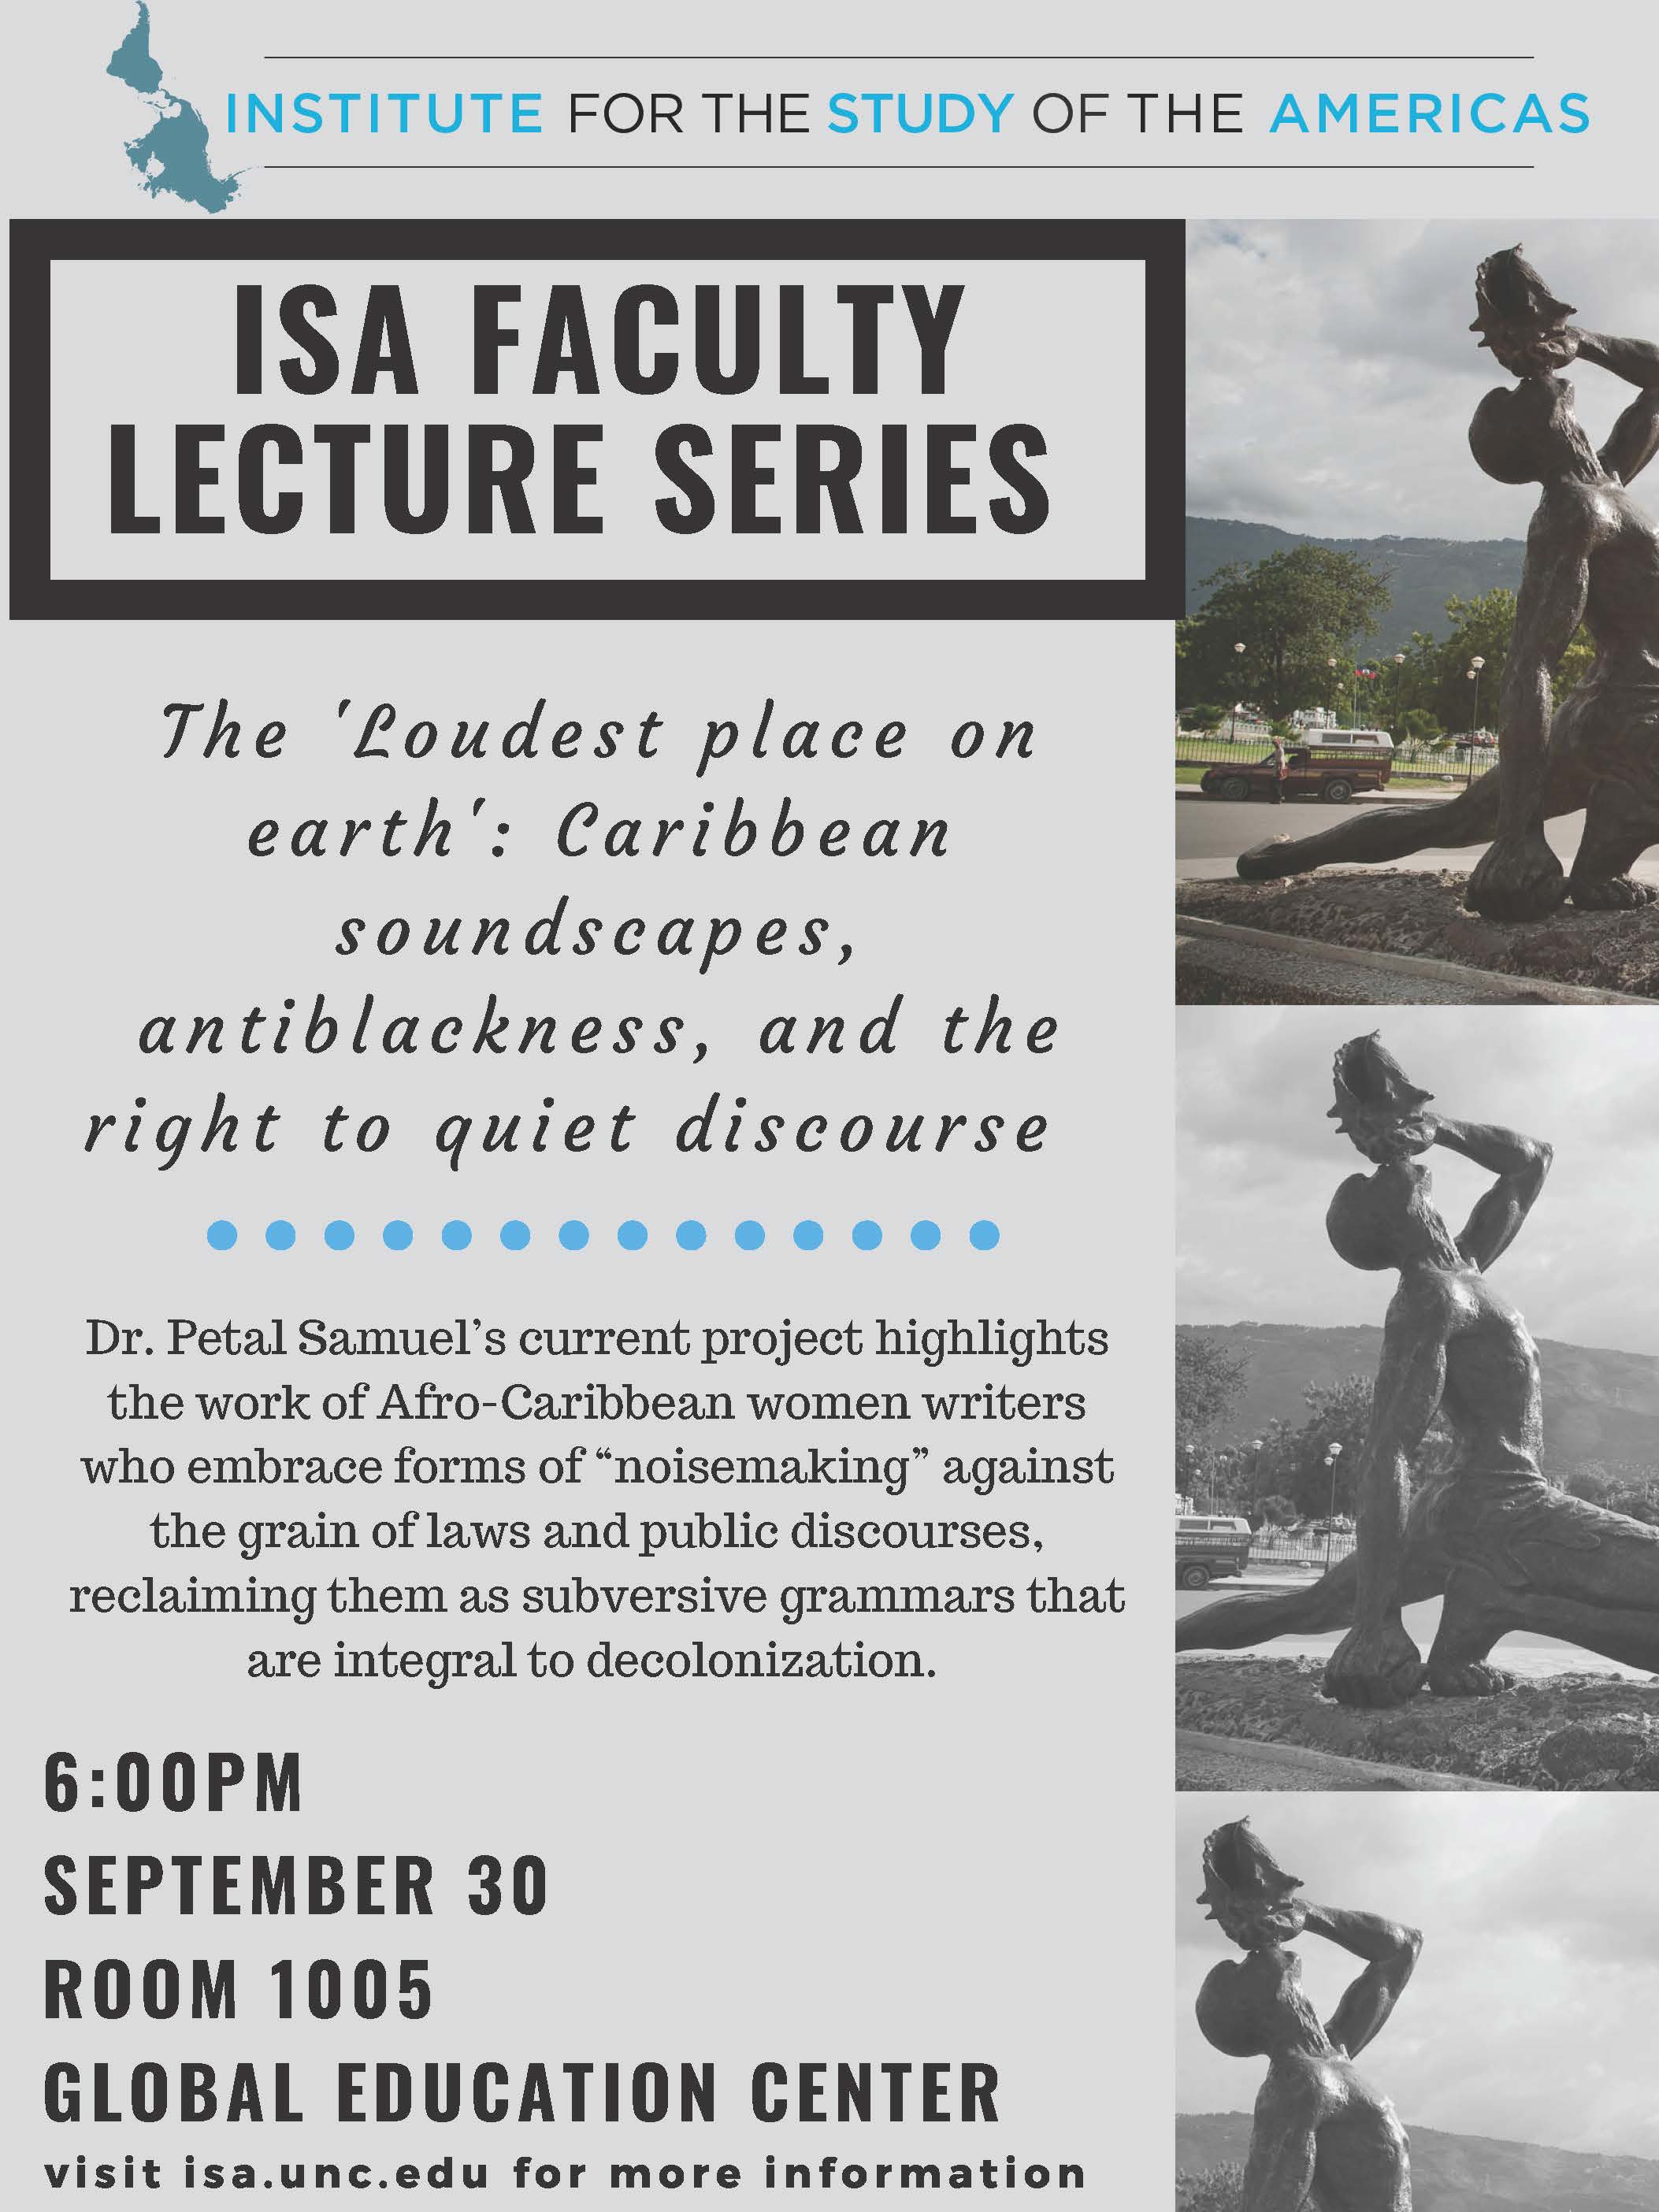 ISA Faculty Lecture Series: Petal Samuel: 'The Loudest Place on Earth': Caribbean Soundscapes, Antiblackness, and Right to Quiet Discourse